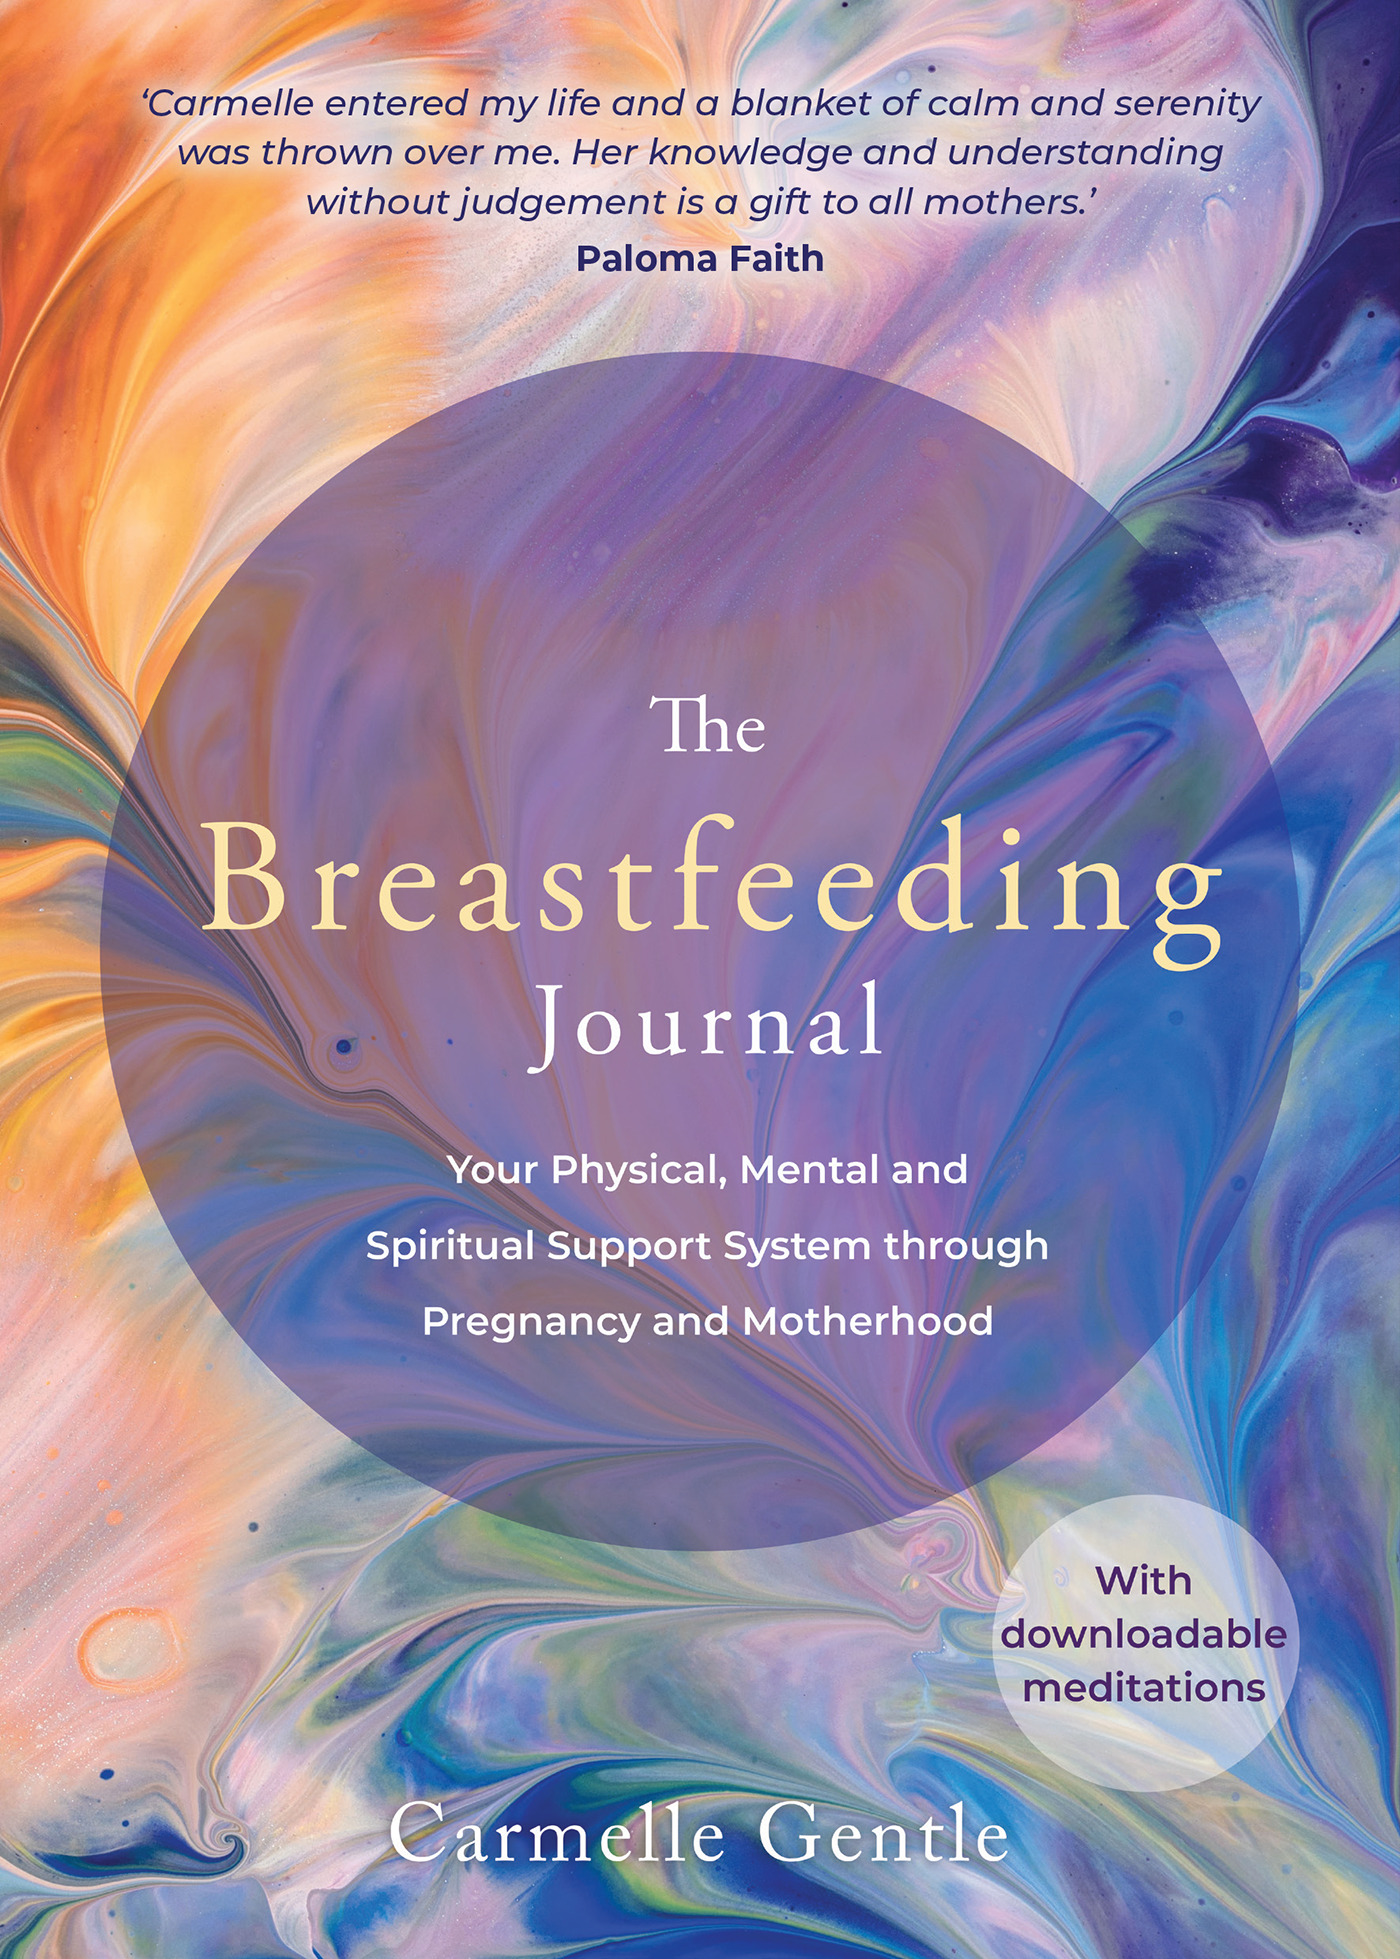 The Breastfeeding Journal : Your Physical, Mental and Spiritual Support System through Pregnancy and Motherh ood | Health